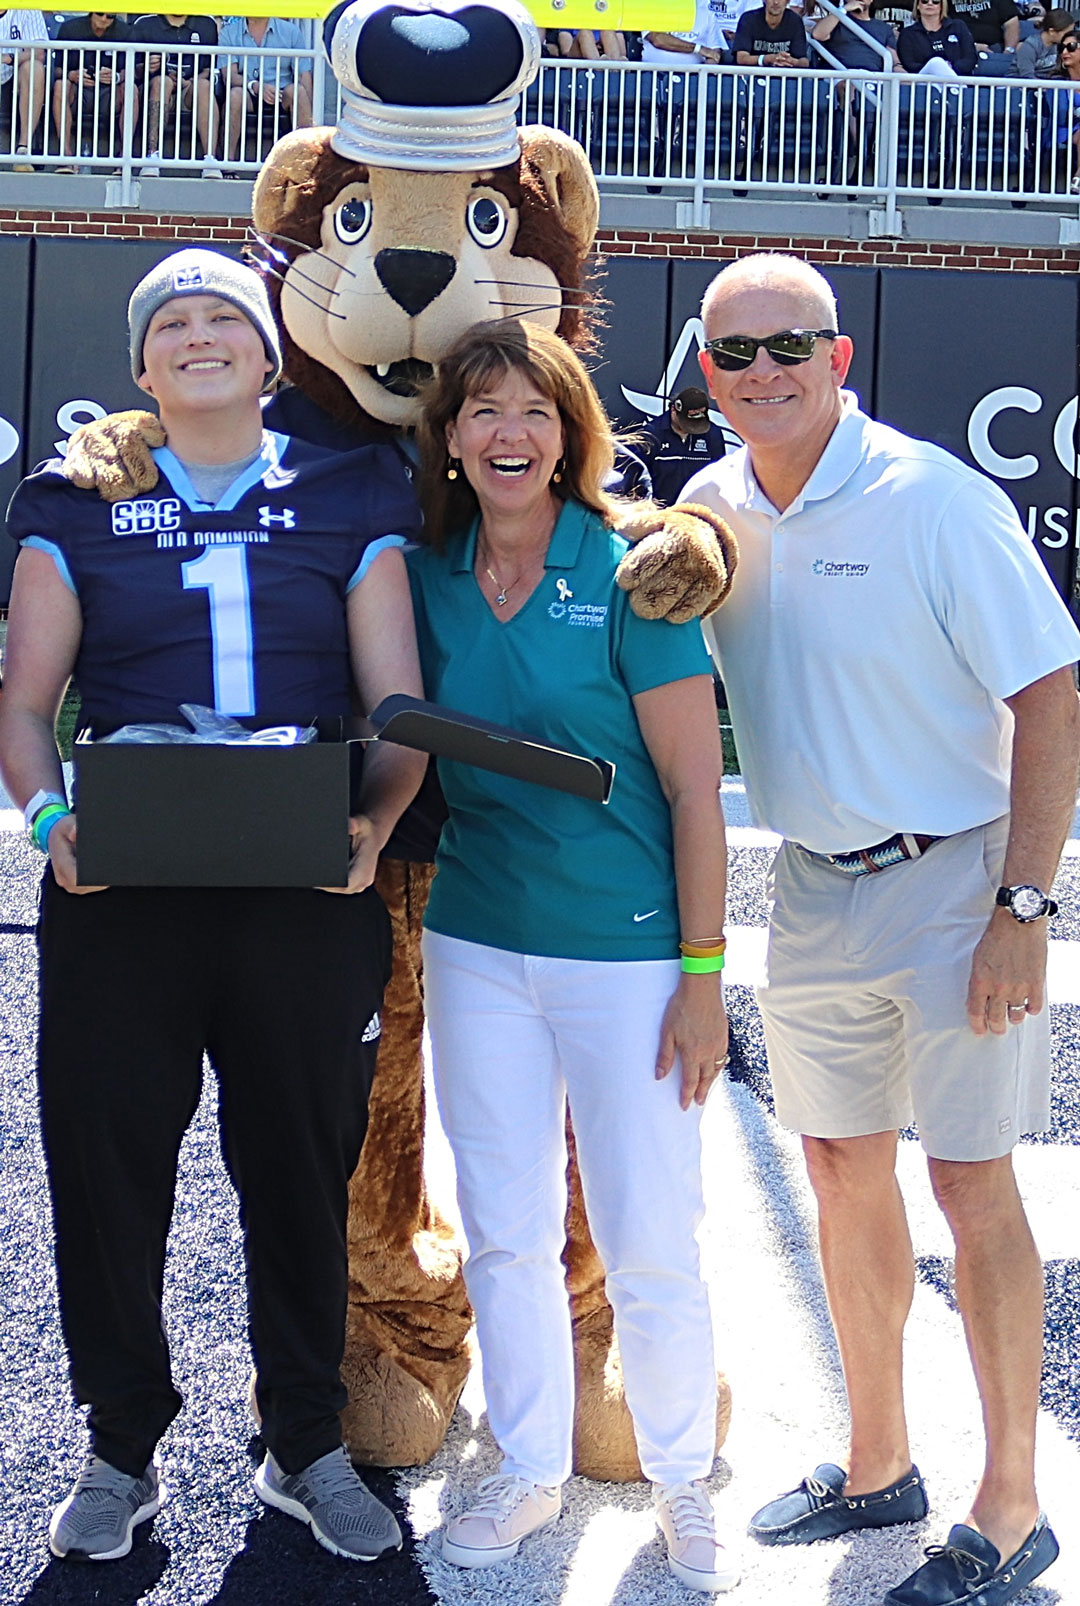 Pictured from left: “Levi” (wish recipient); “Big Blue” Old Dominion University mascot; Christine Wilson, president, Chartway Promise Foundation; Brian T. Schools, president/CEO, Chartway Credit Union. Thanks to the Chartway Promise Foundation and Toby’s Dream Foundation, Levi, a 17-year-old amputee and battling Synovial sarcoma, can now relive the experience of running using Virtual Reality goggles and omnidirectional treadmill.